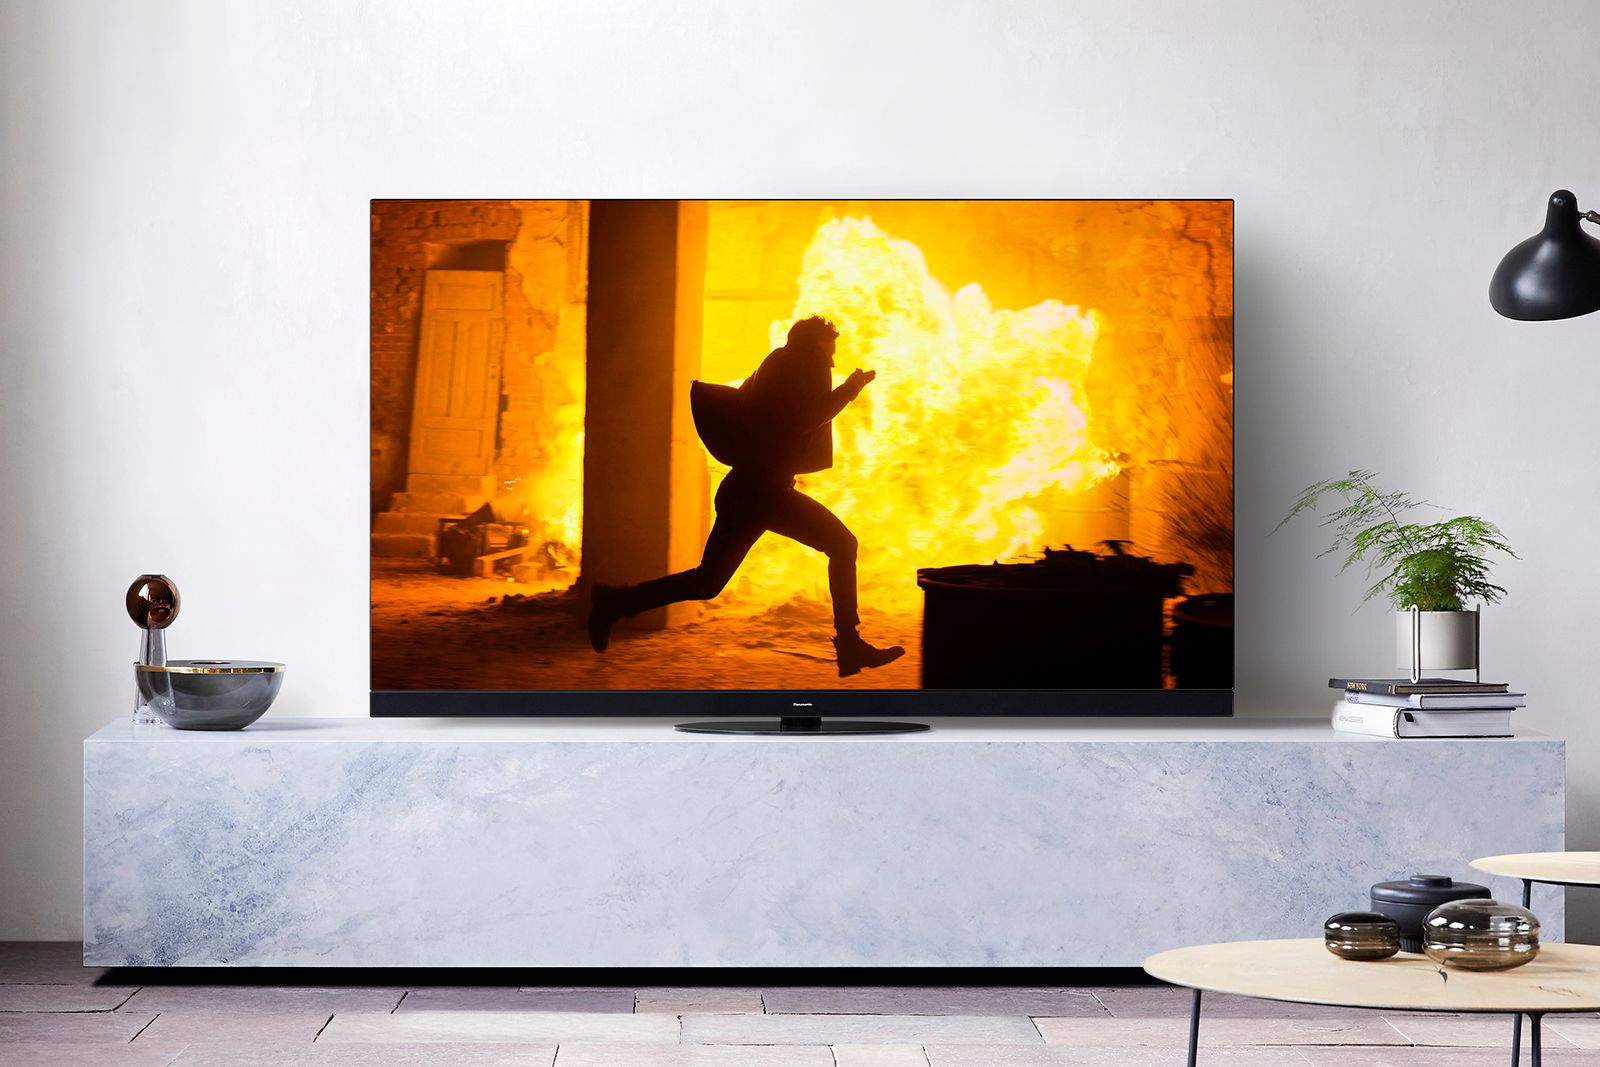 Panasonic expands 2020 OLED TV line with HZ1500 and HZ1000 new 4K HDR LED TVs coming too image 1